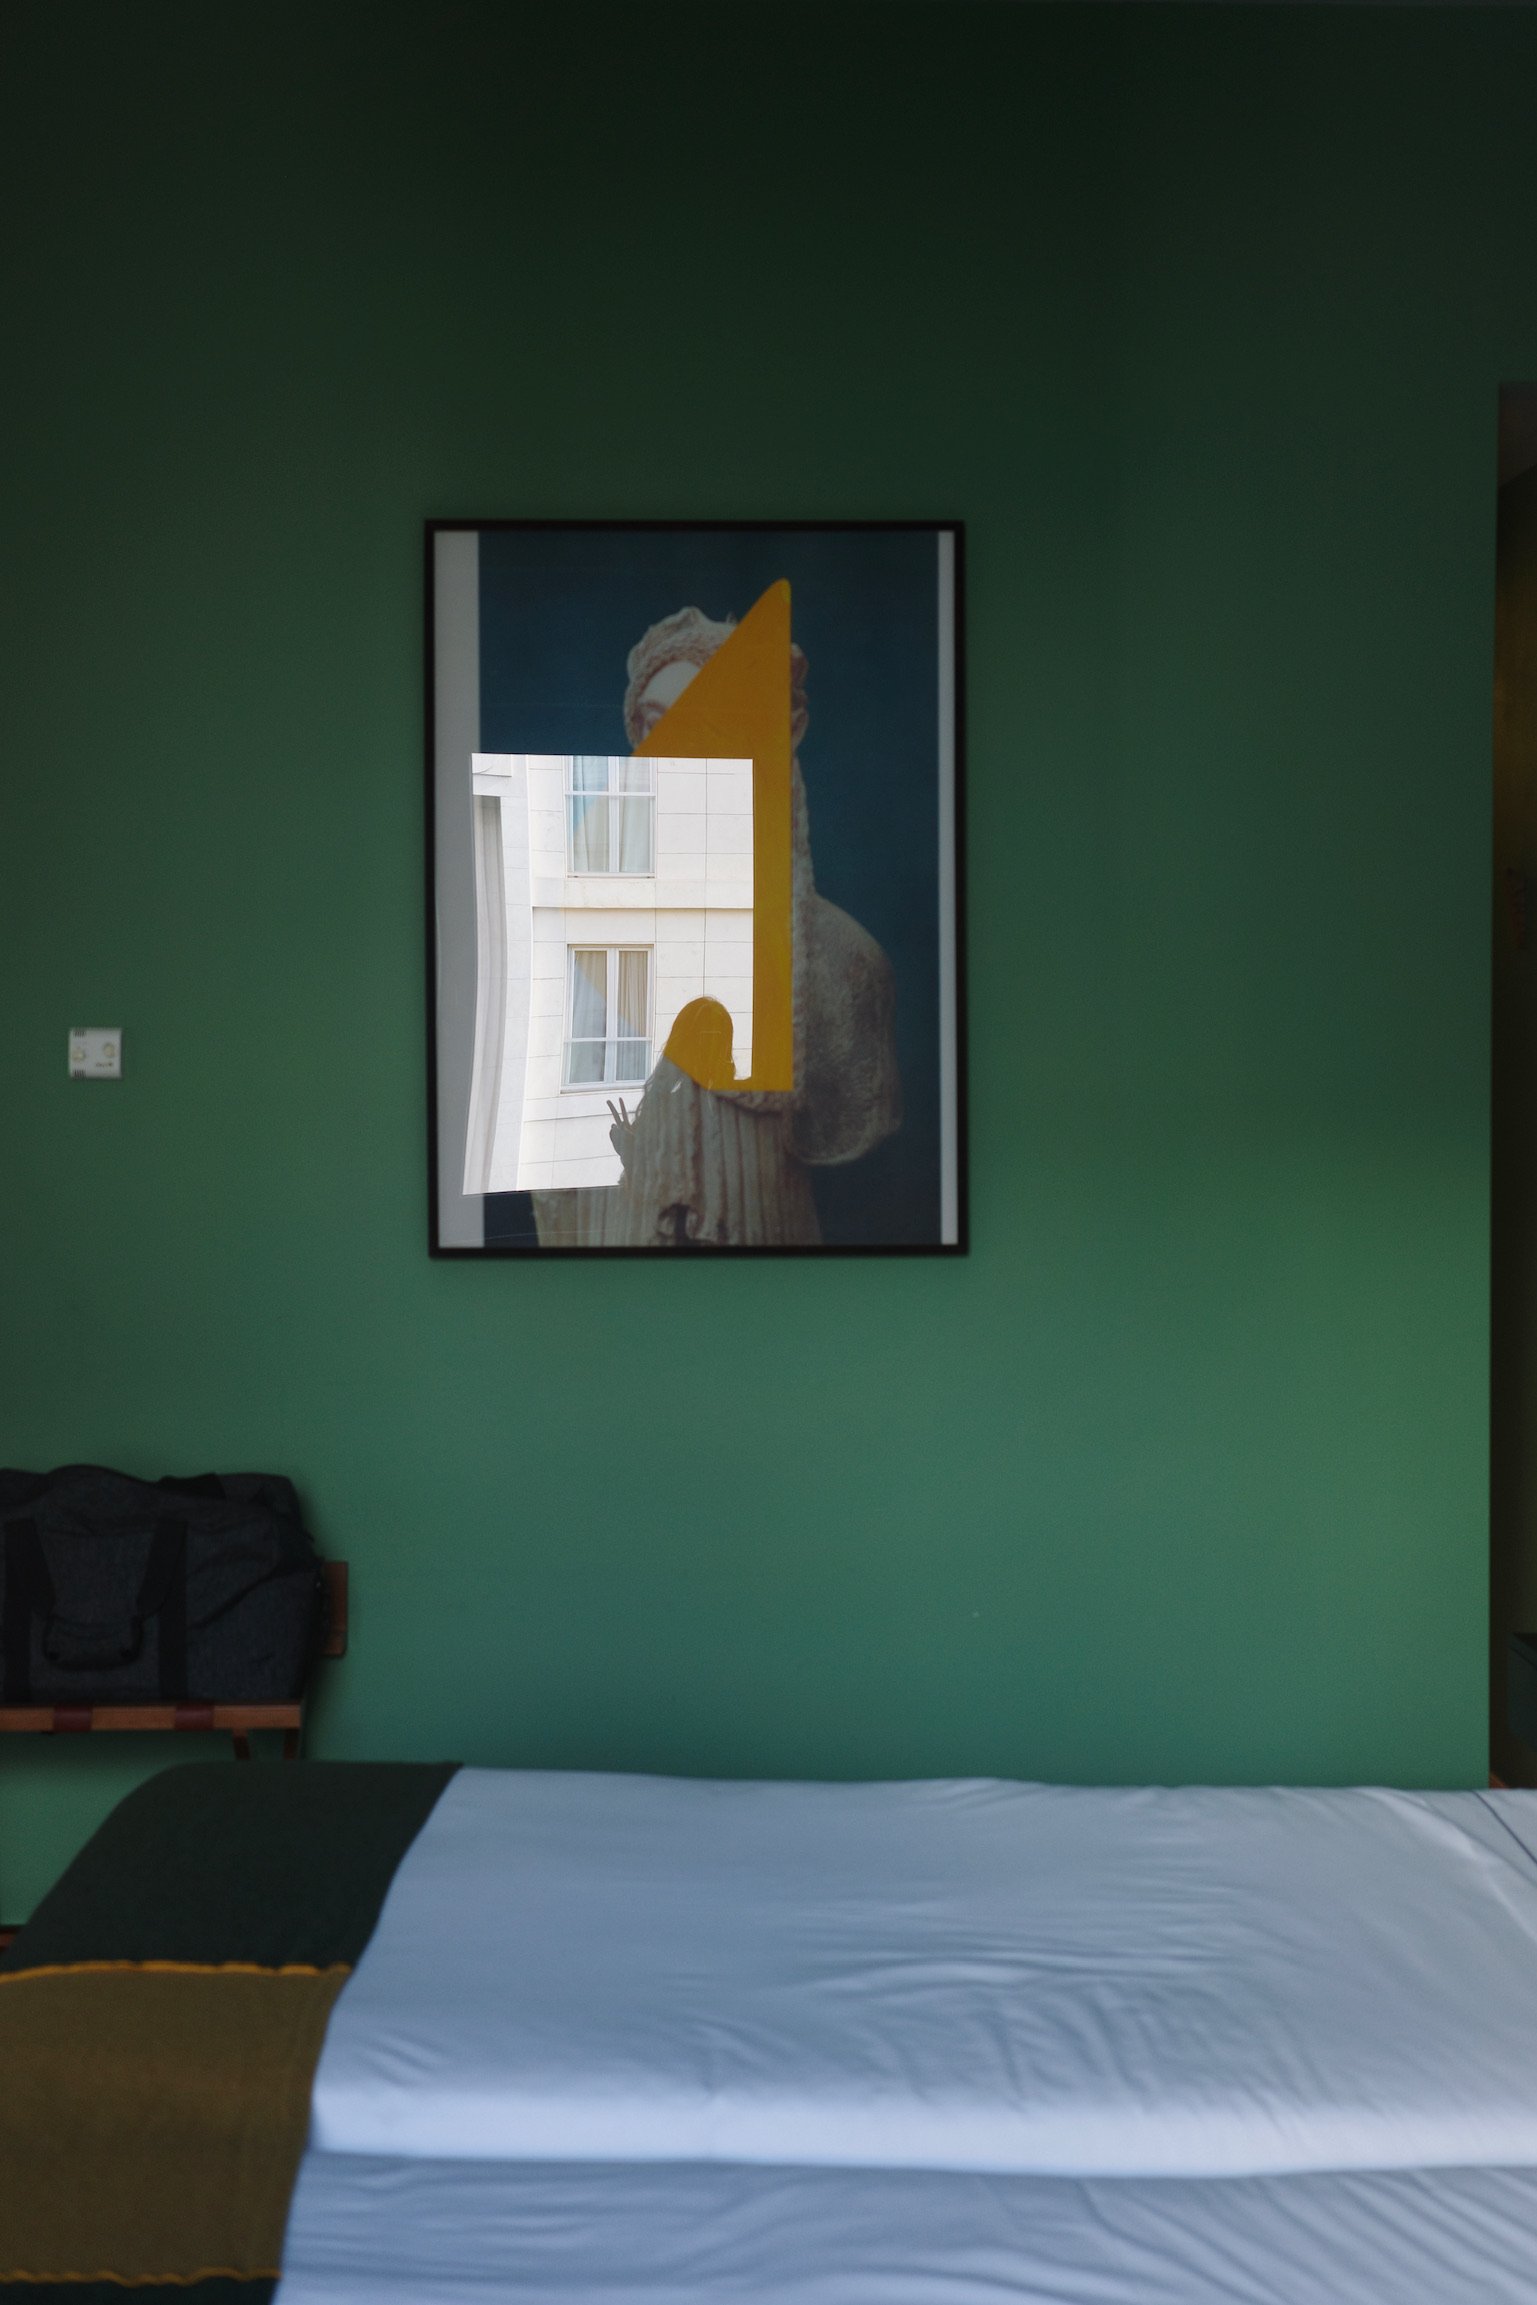 Selfie in the reflection of a framed painting in a hotel room with green walls and green throws.